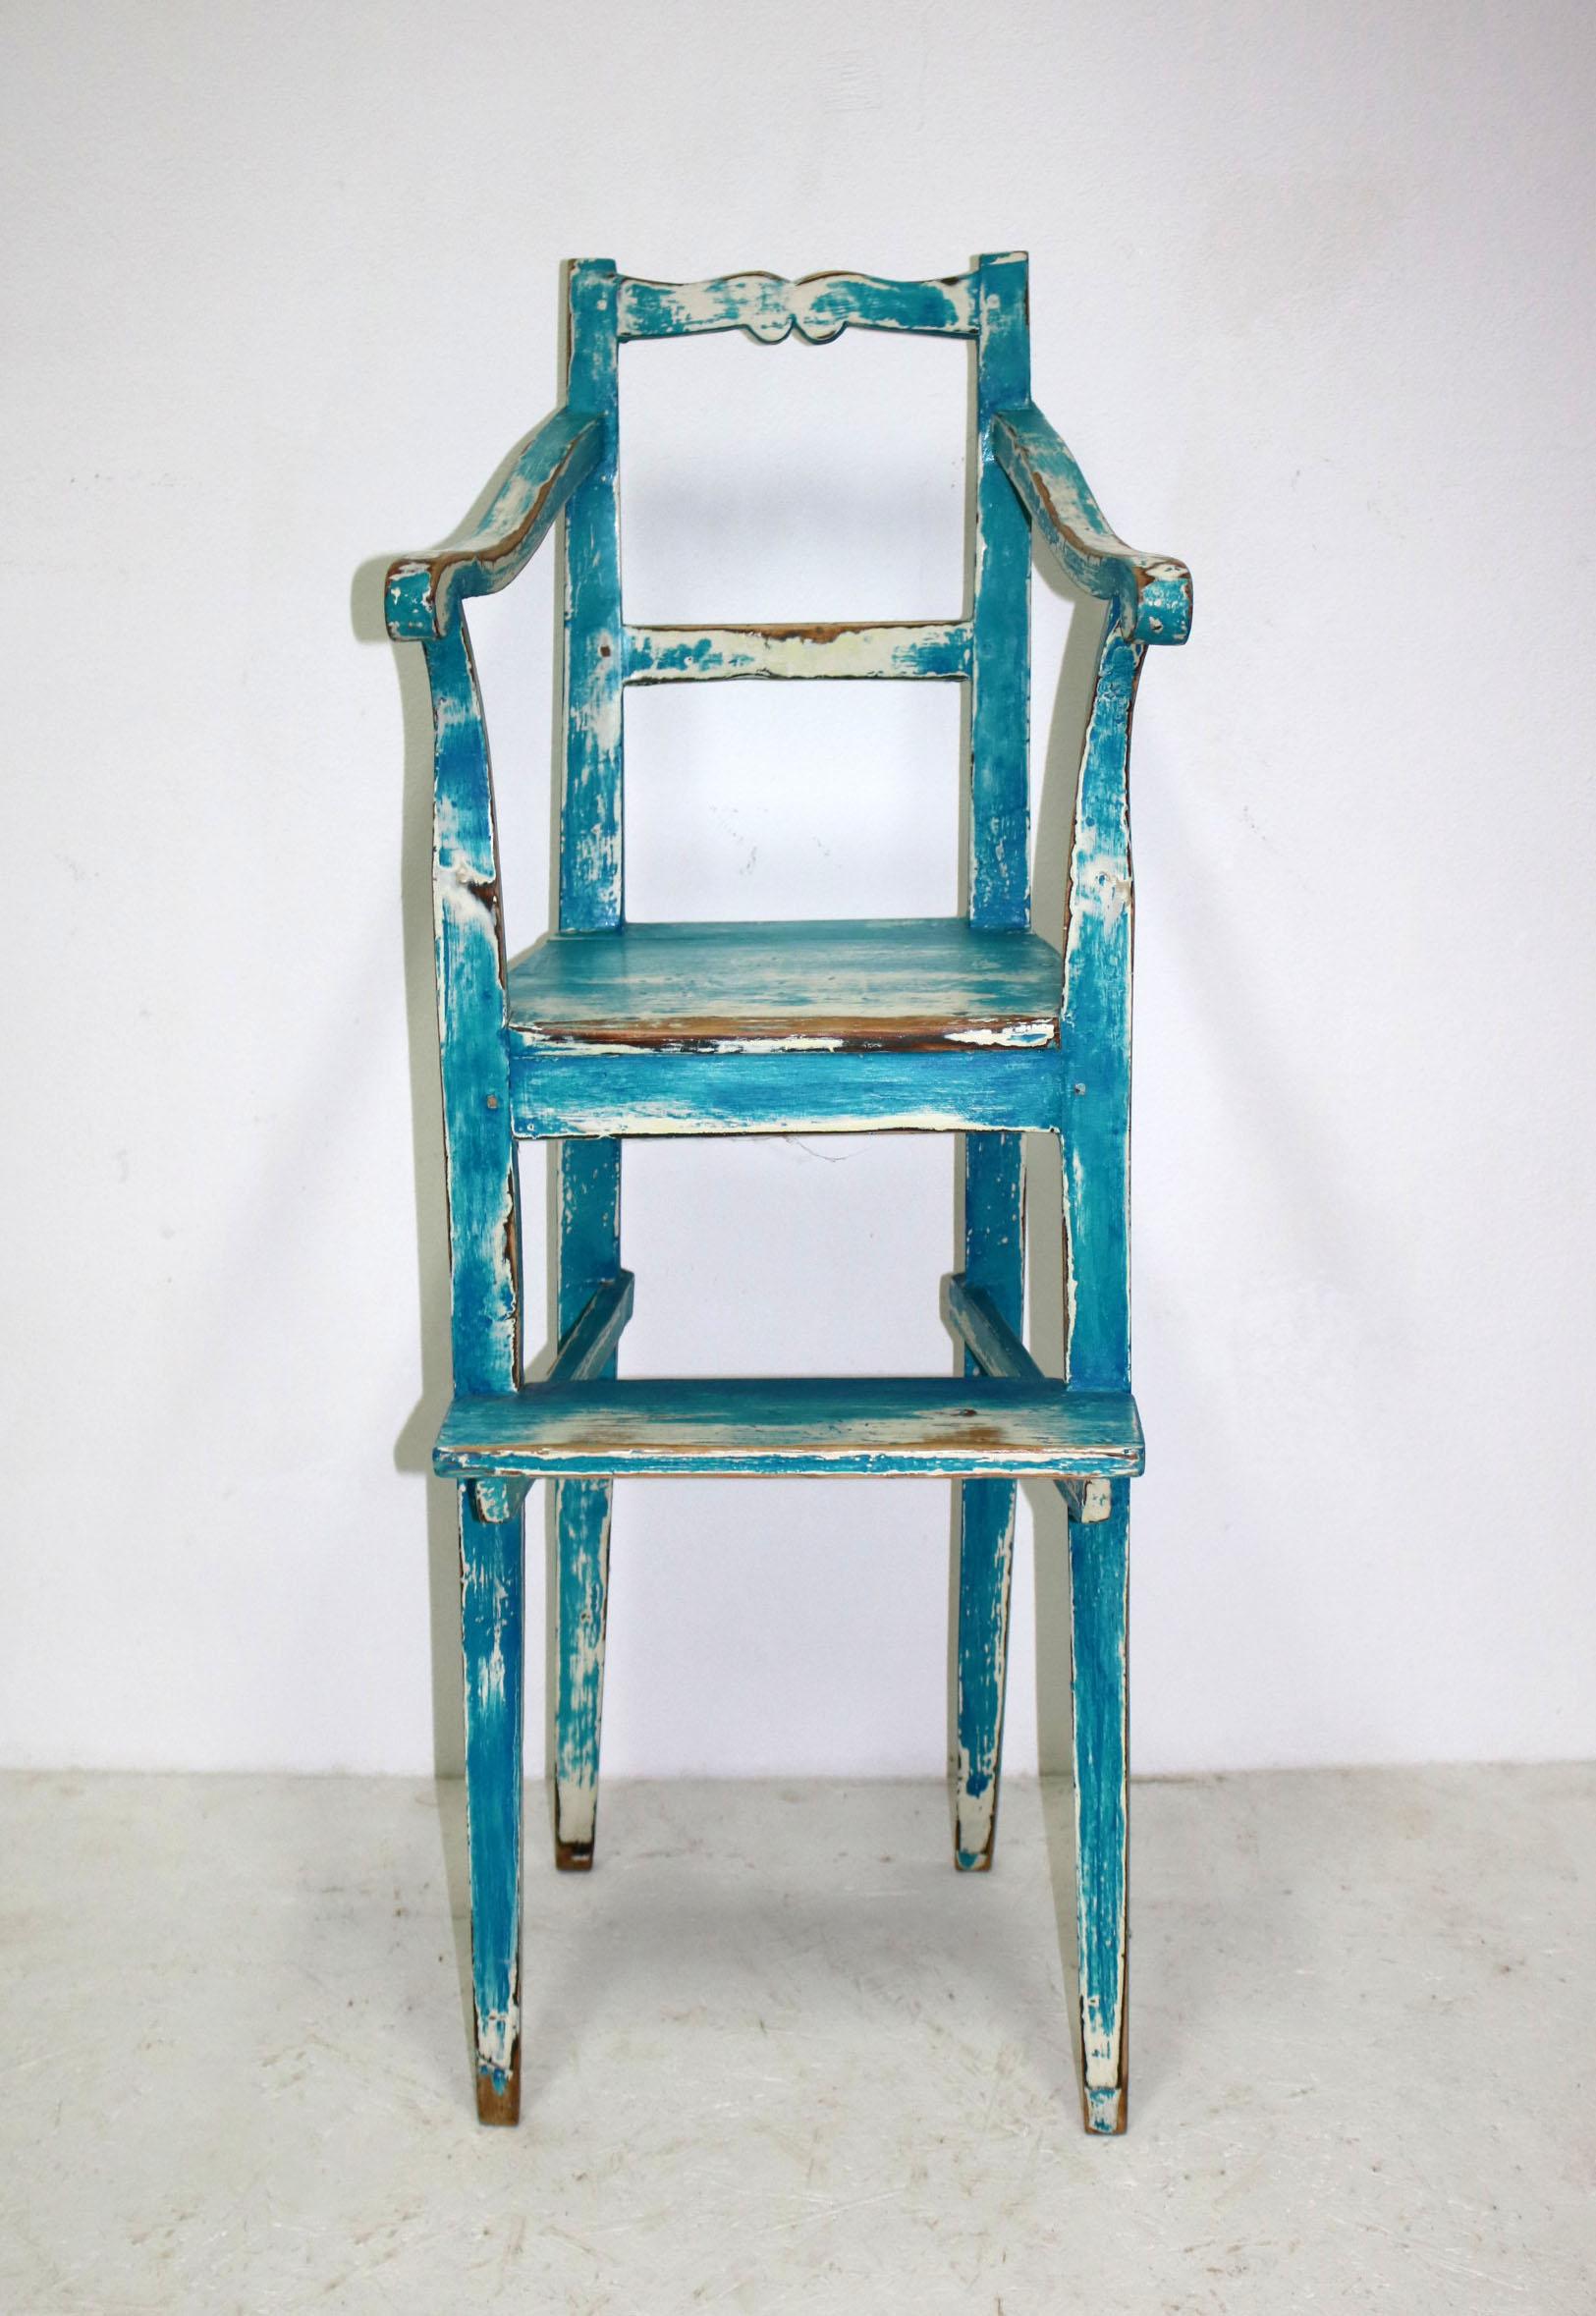 This is a beautiful ocena blue and white children's dining chair. It was used in a noble family in order to increase the seating height of their child.